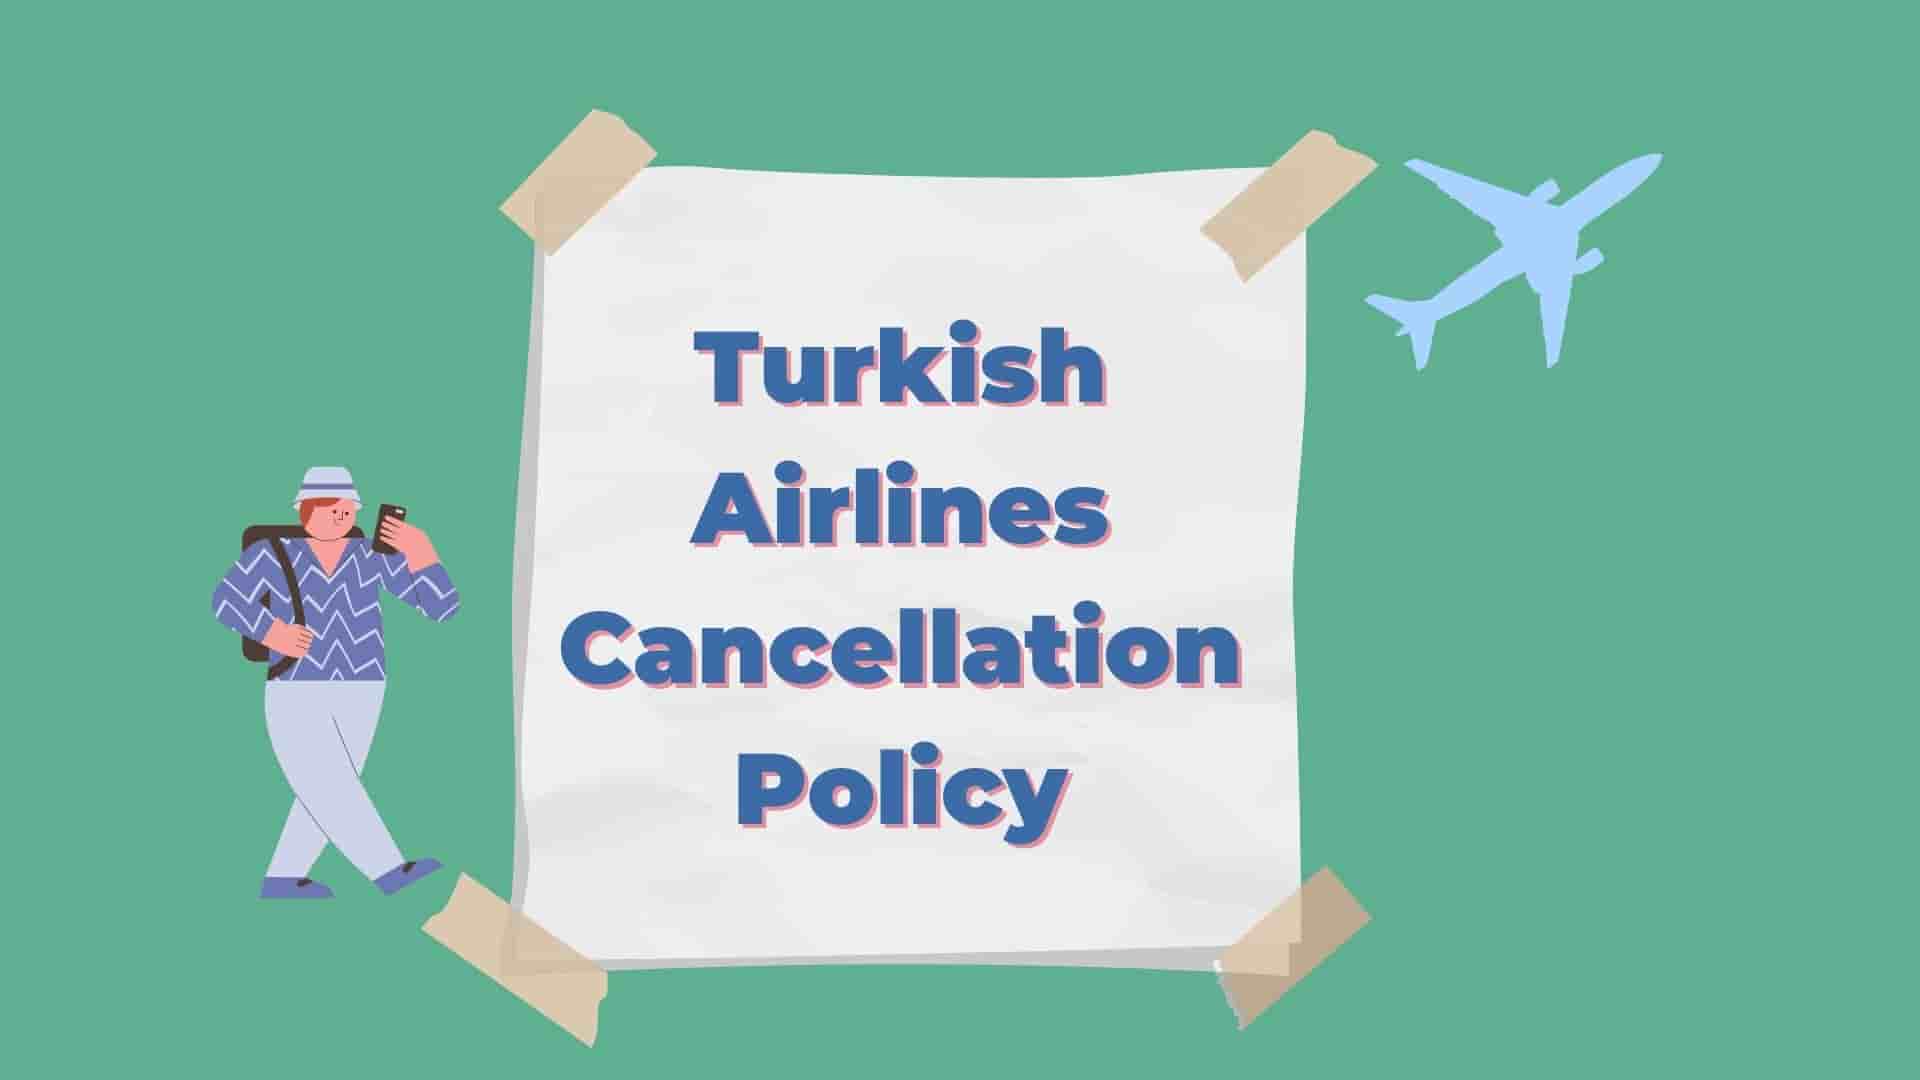 Turkish Airlines Cancellation Policy63f85d27afab0.jpg